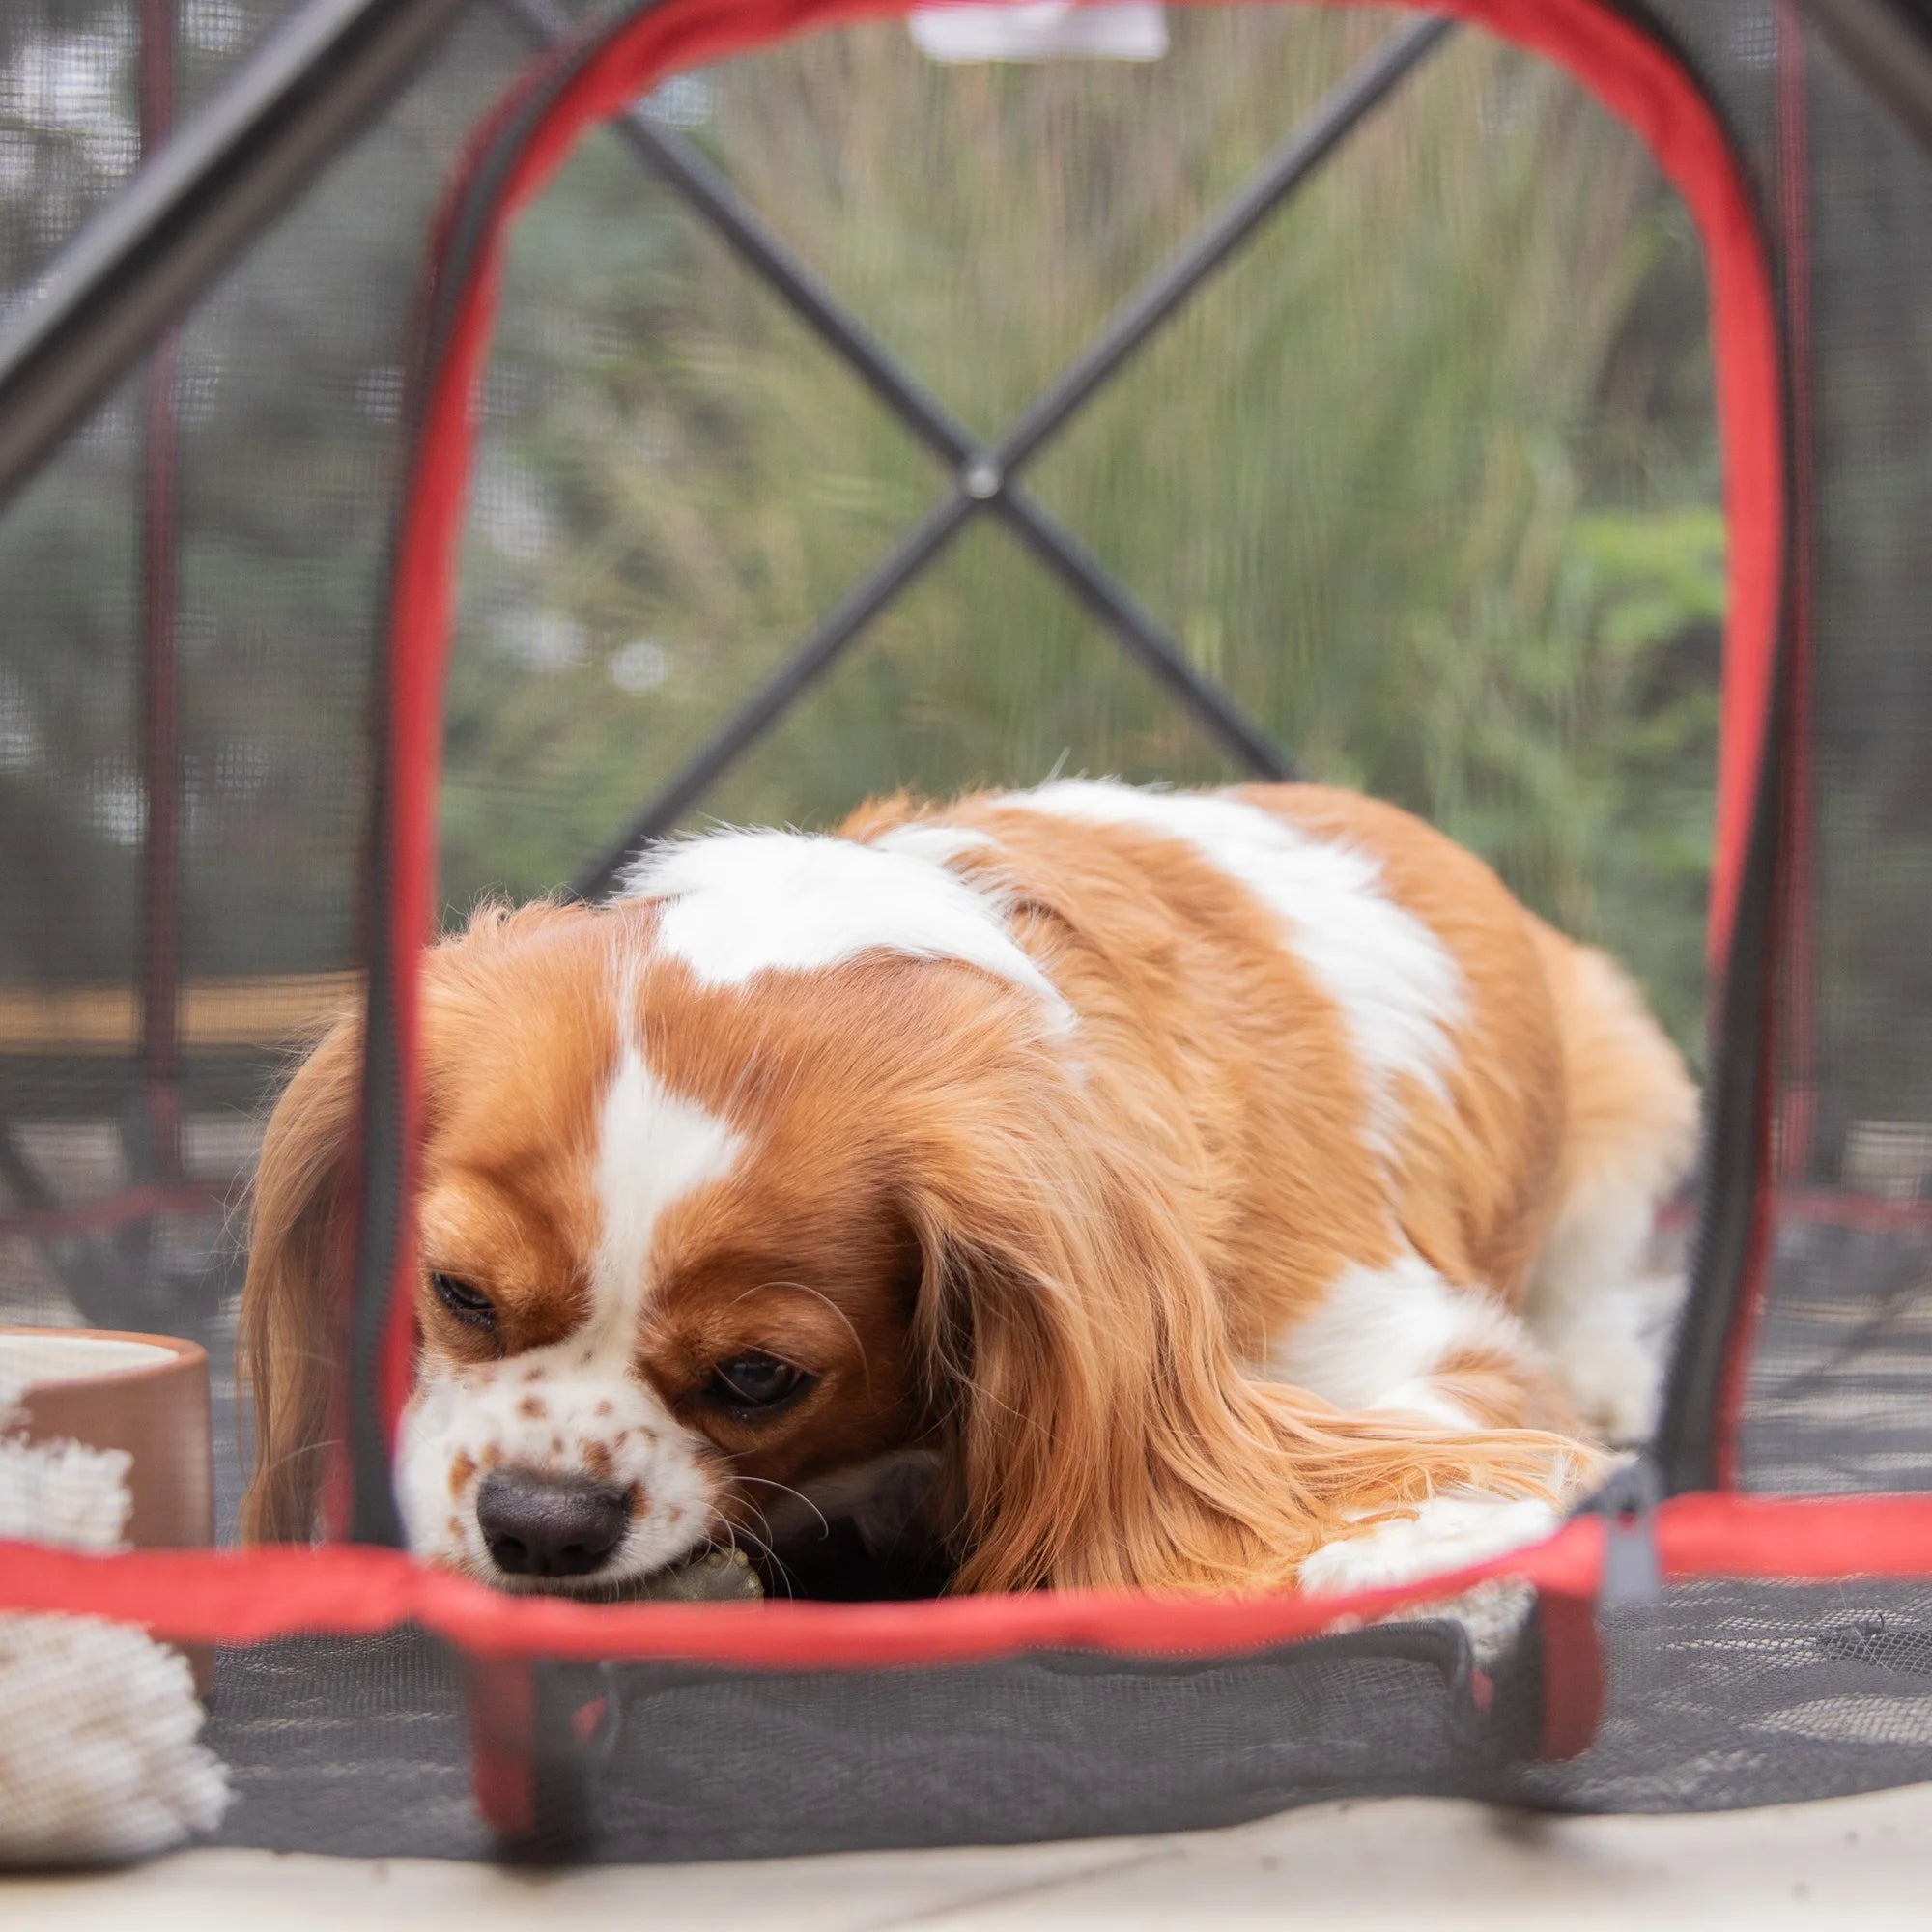 Dog chewing on treat in Portable Pet Pen.